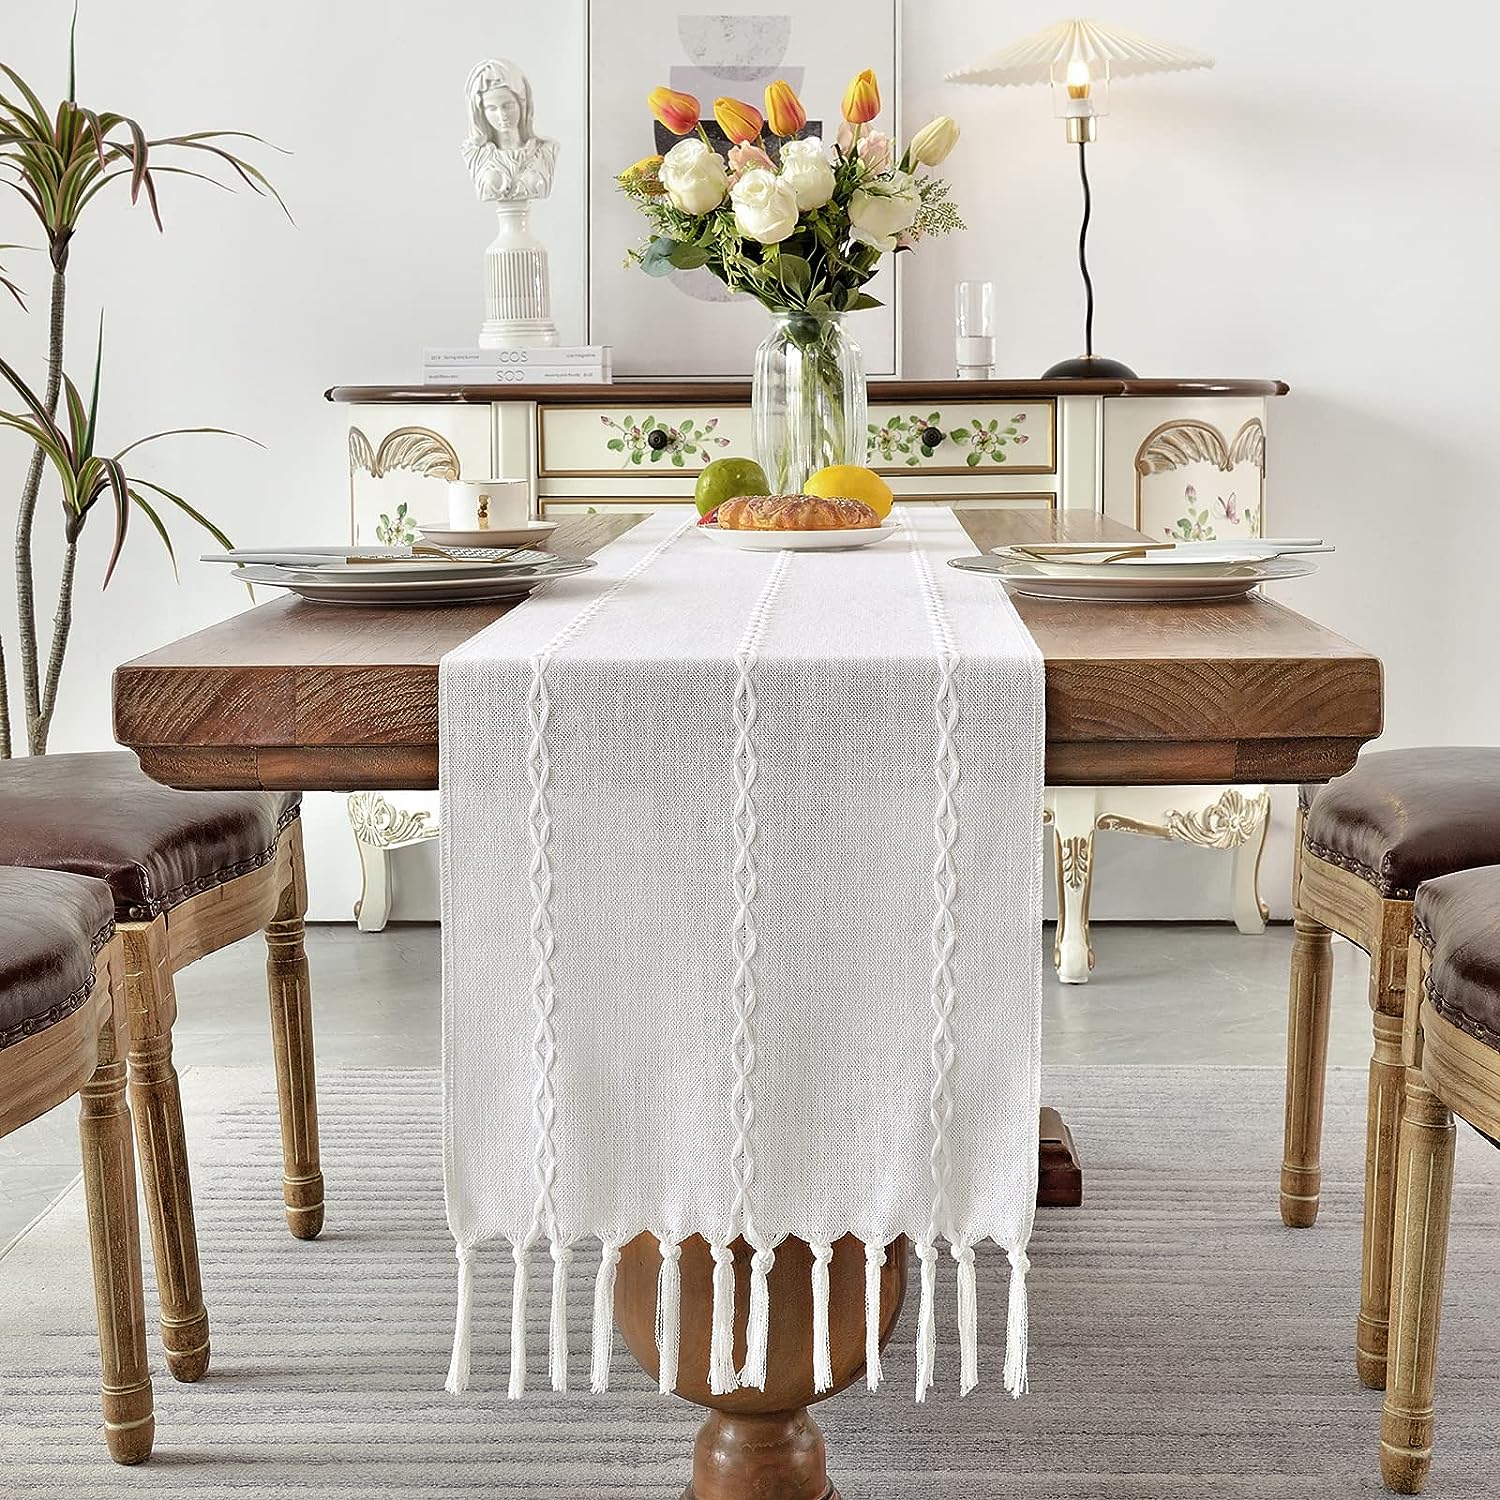 Wracra Cotton Linen Table Runner Farmhouse Style White Table Runner 180cm with Hand-tassels for Party, Dining Room Decorations Dessert Table Decor(White, 180cm) 5